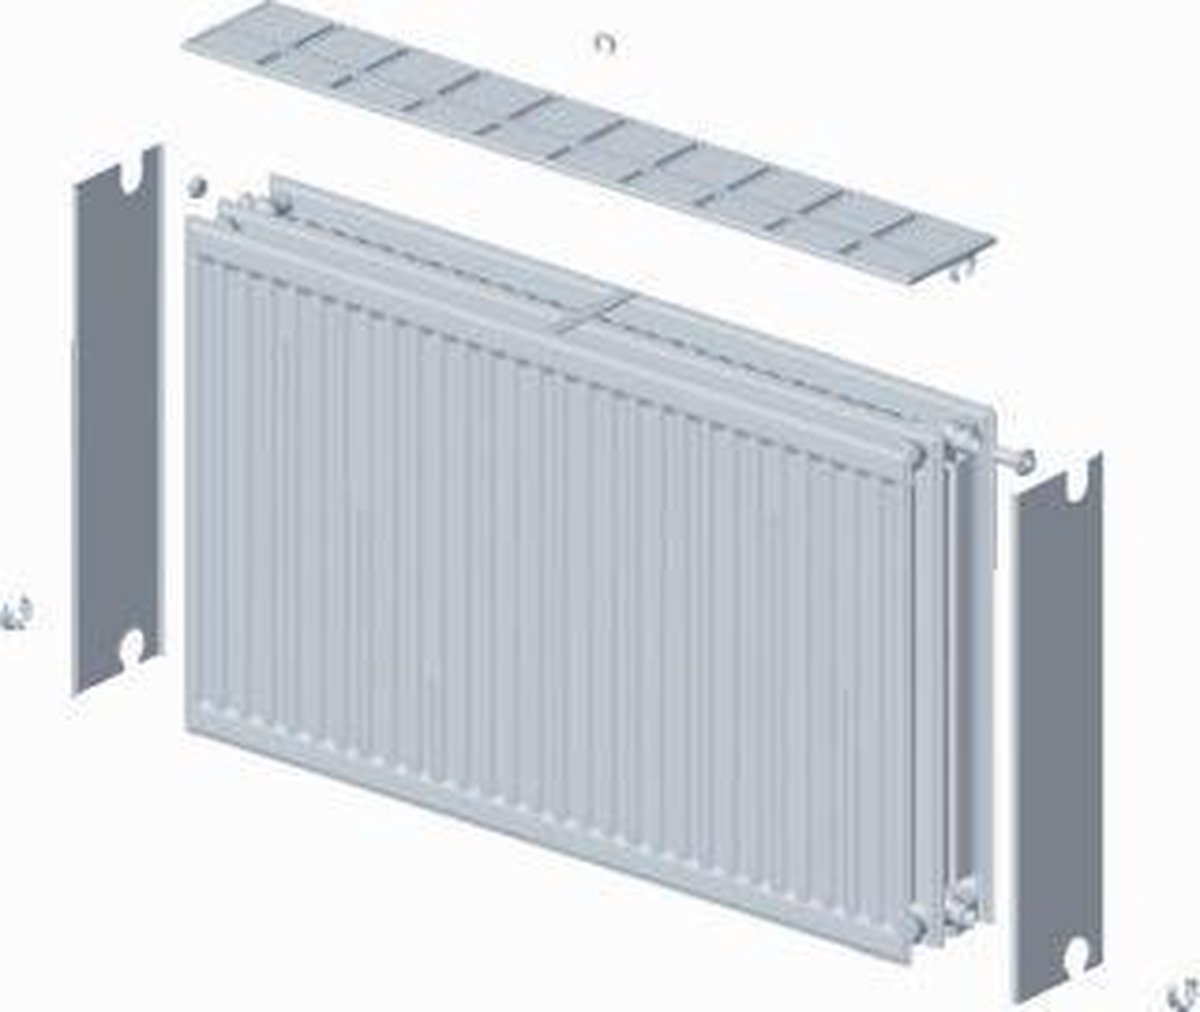 Stelrad paneelradiator Novello, staal, wit, (hxlxd) 600x1800x158mm, 33